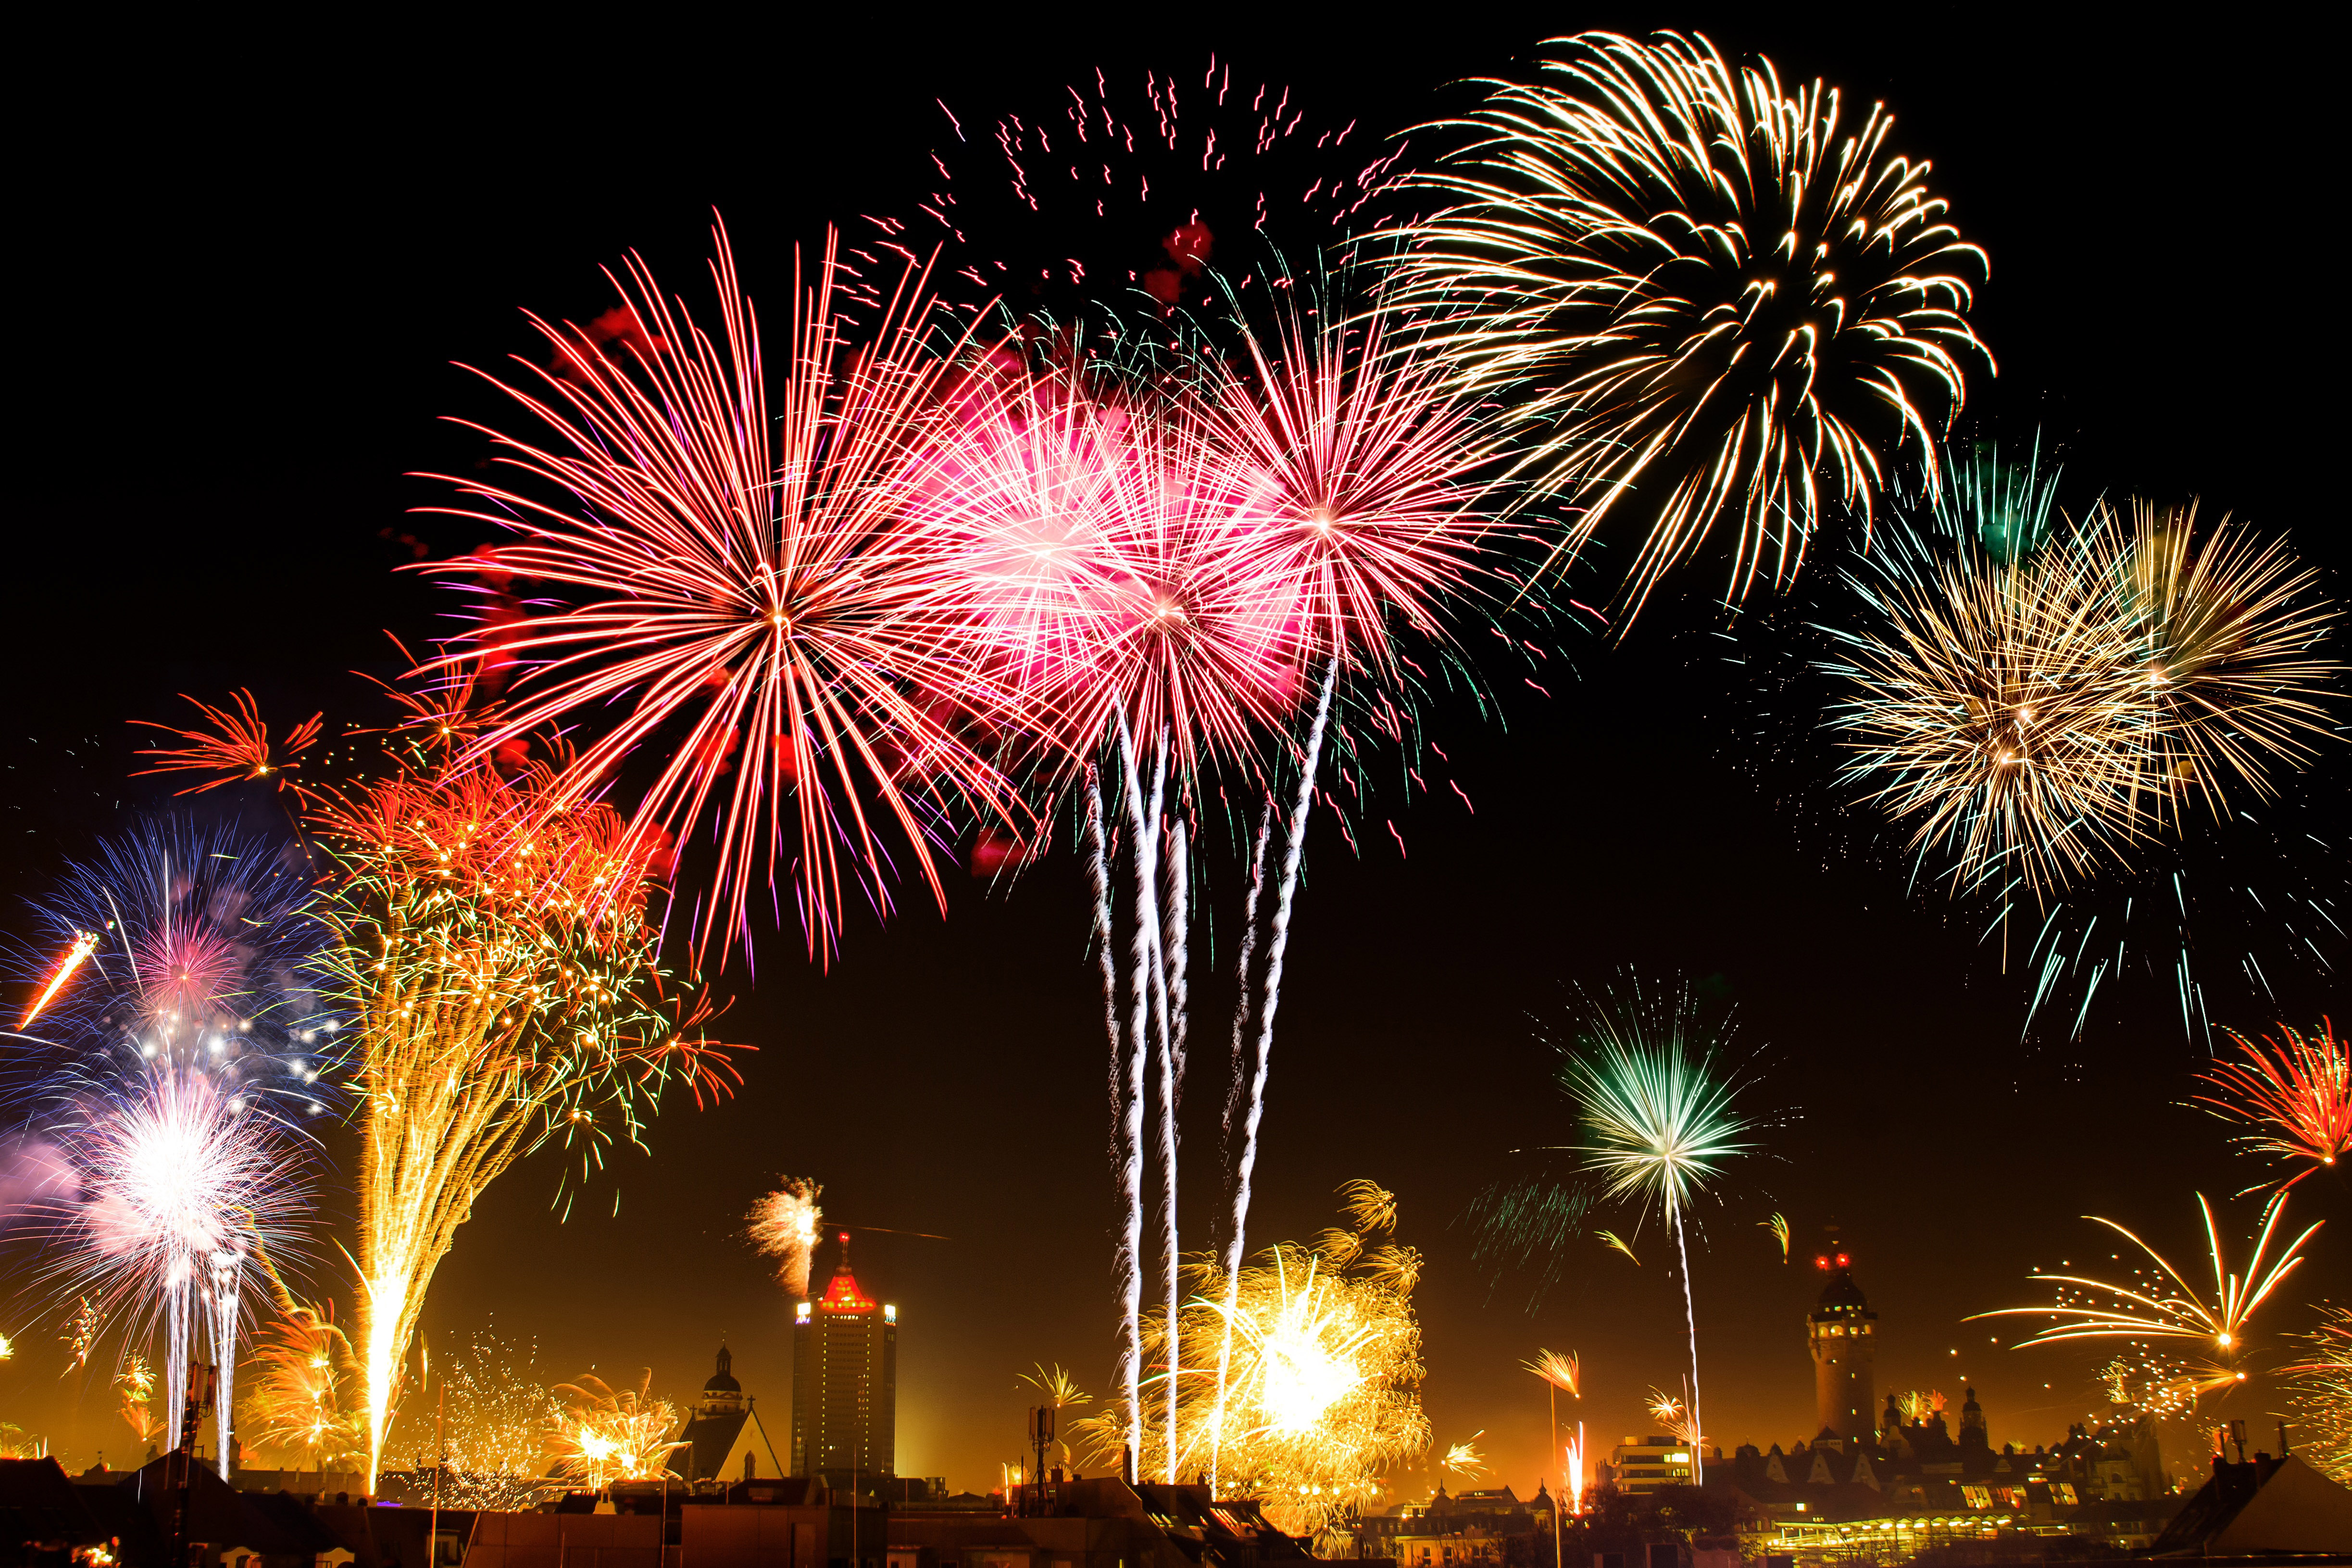 Colorful Fireworks on New Year's Day over the city Celebration image - Free stock photo - Public 